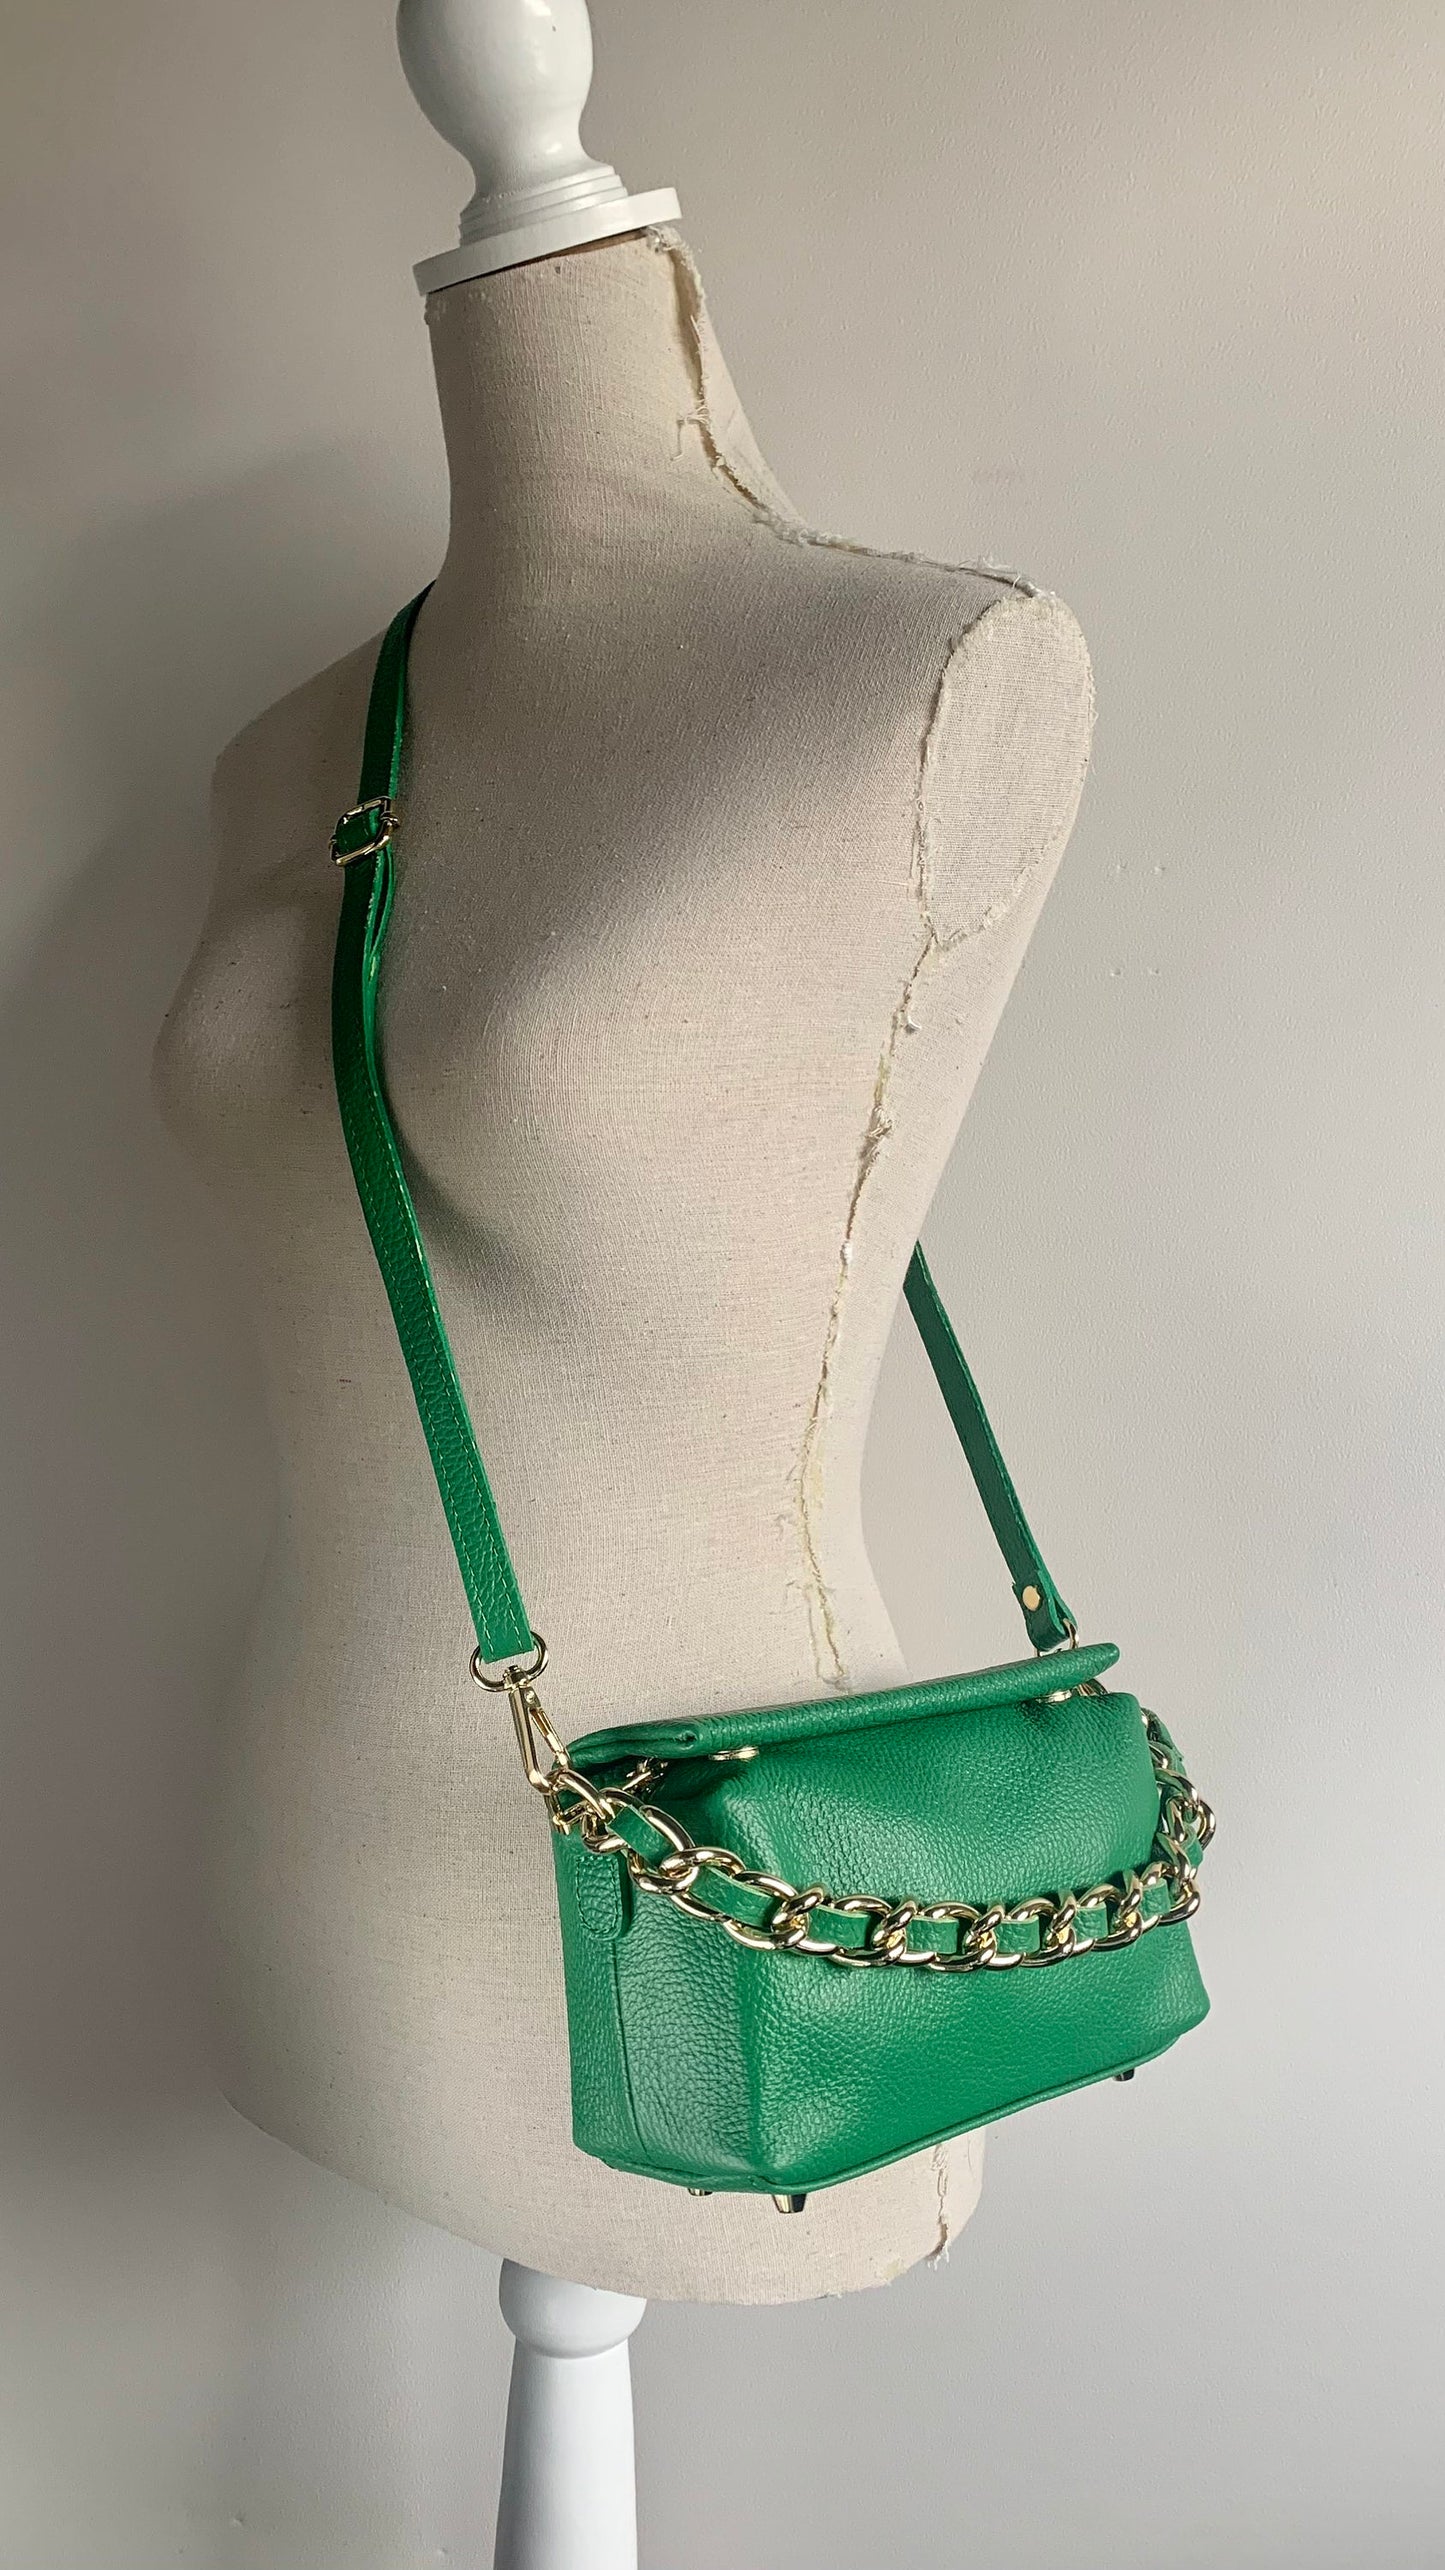 Green Boxy Bag With Chain Handle - Erin